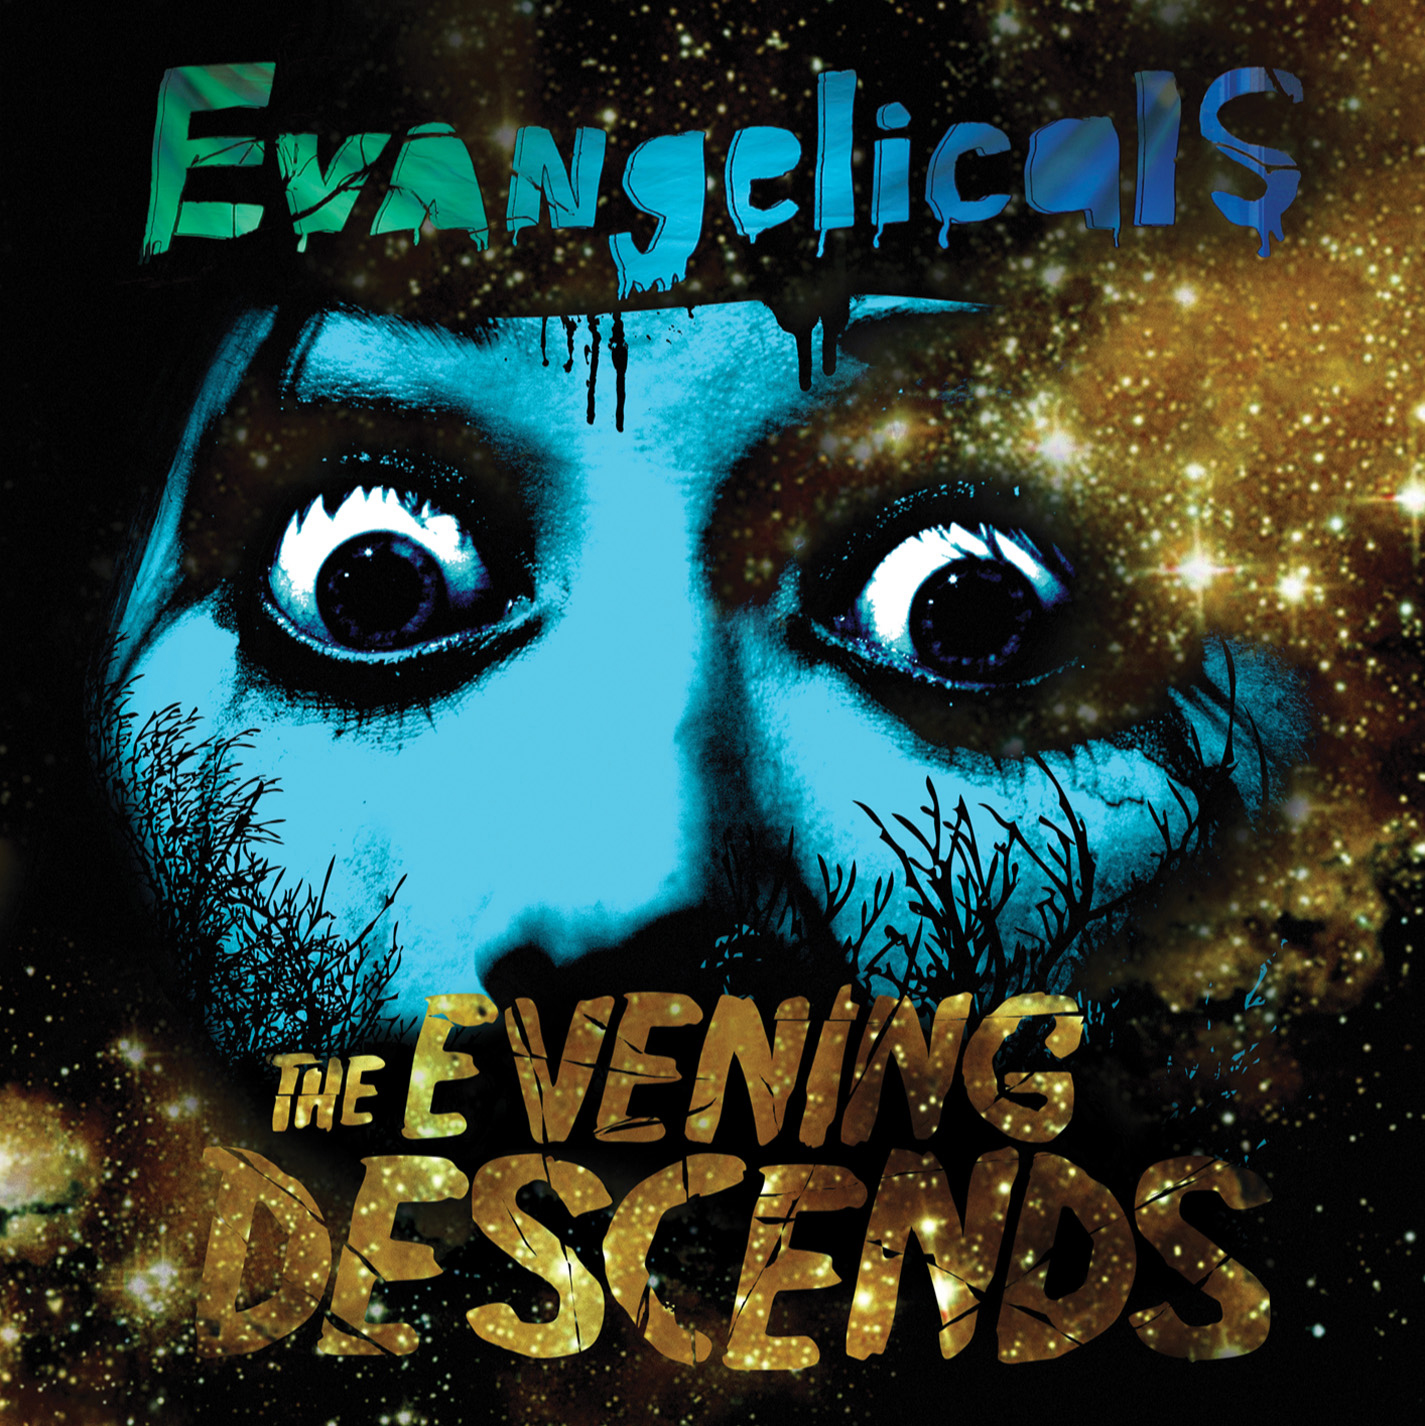 Evangelicals' The Evening Descends is out now.